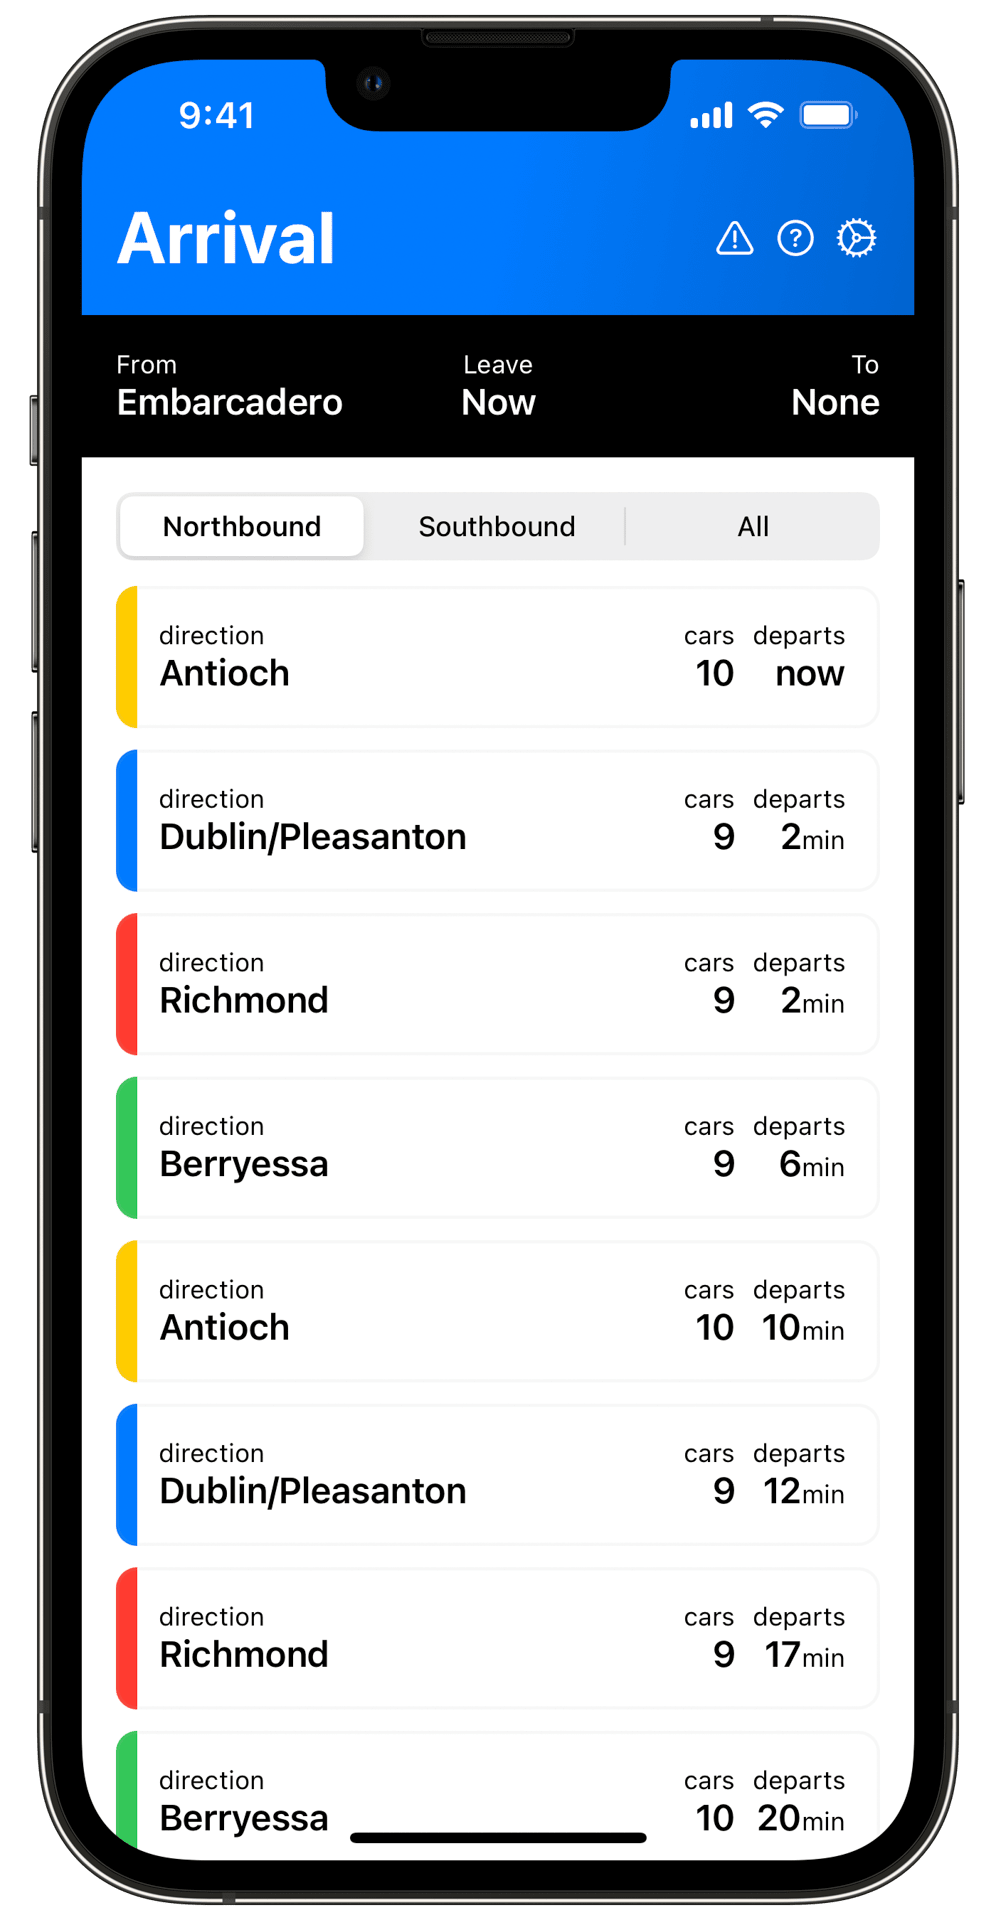 Main screen of the Arrival BART app.